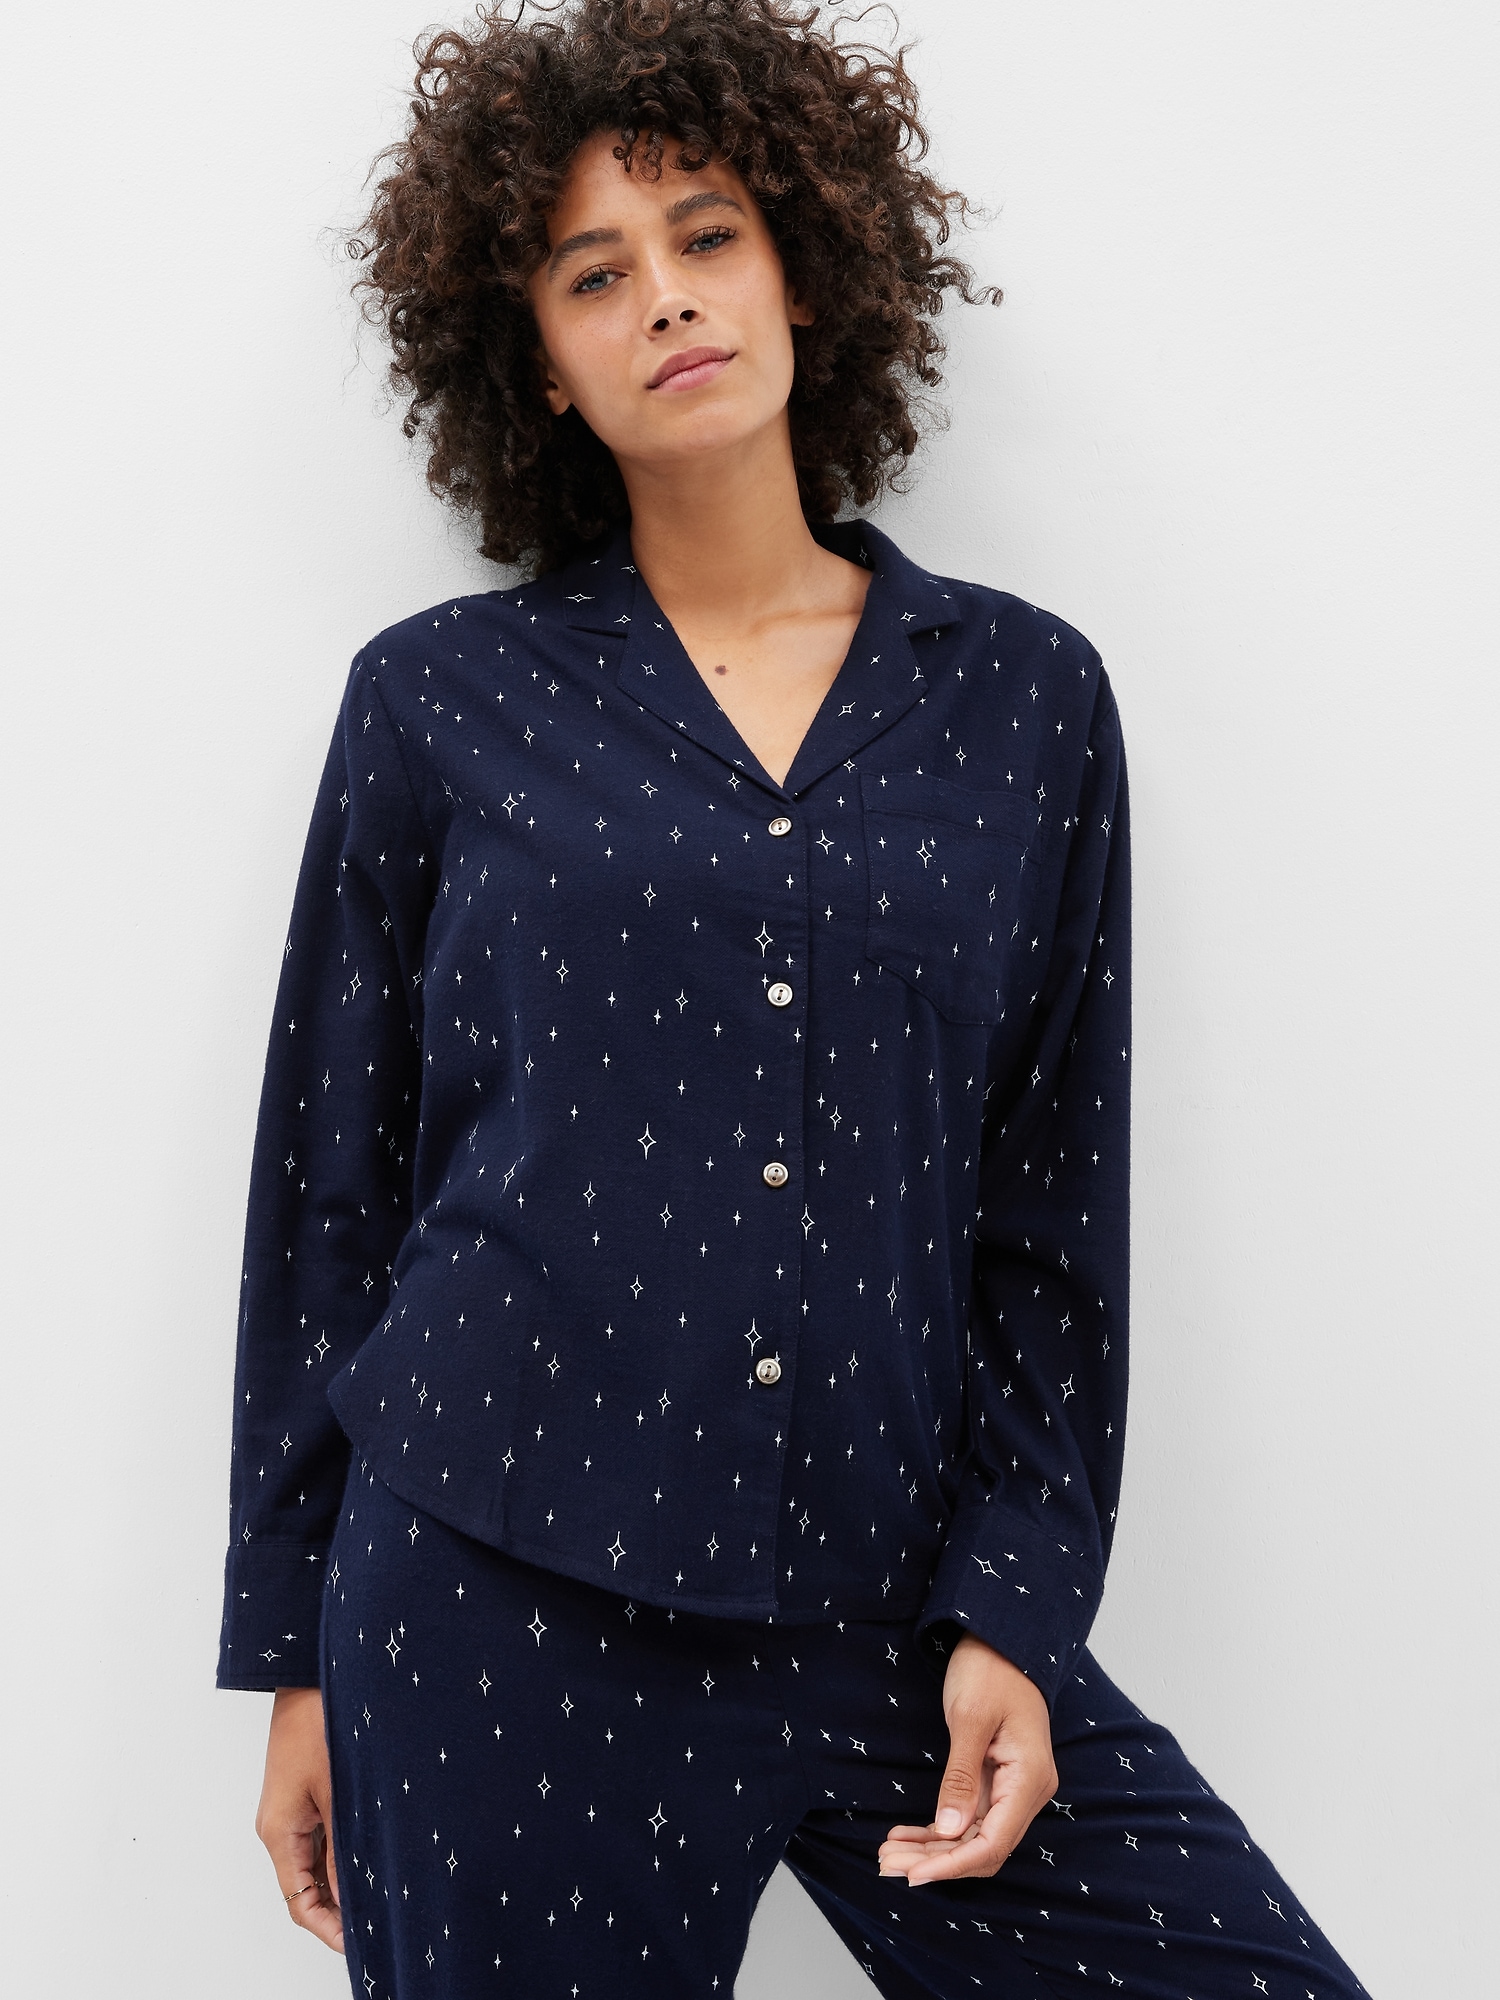 Relaxed Flannel PJ Shirt